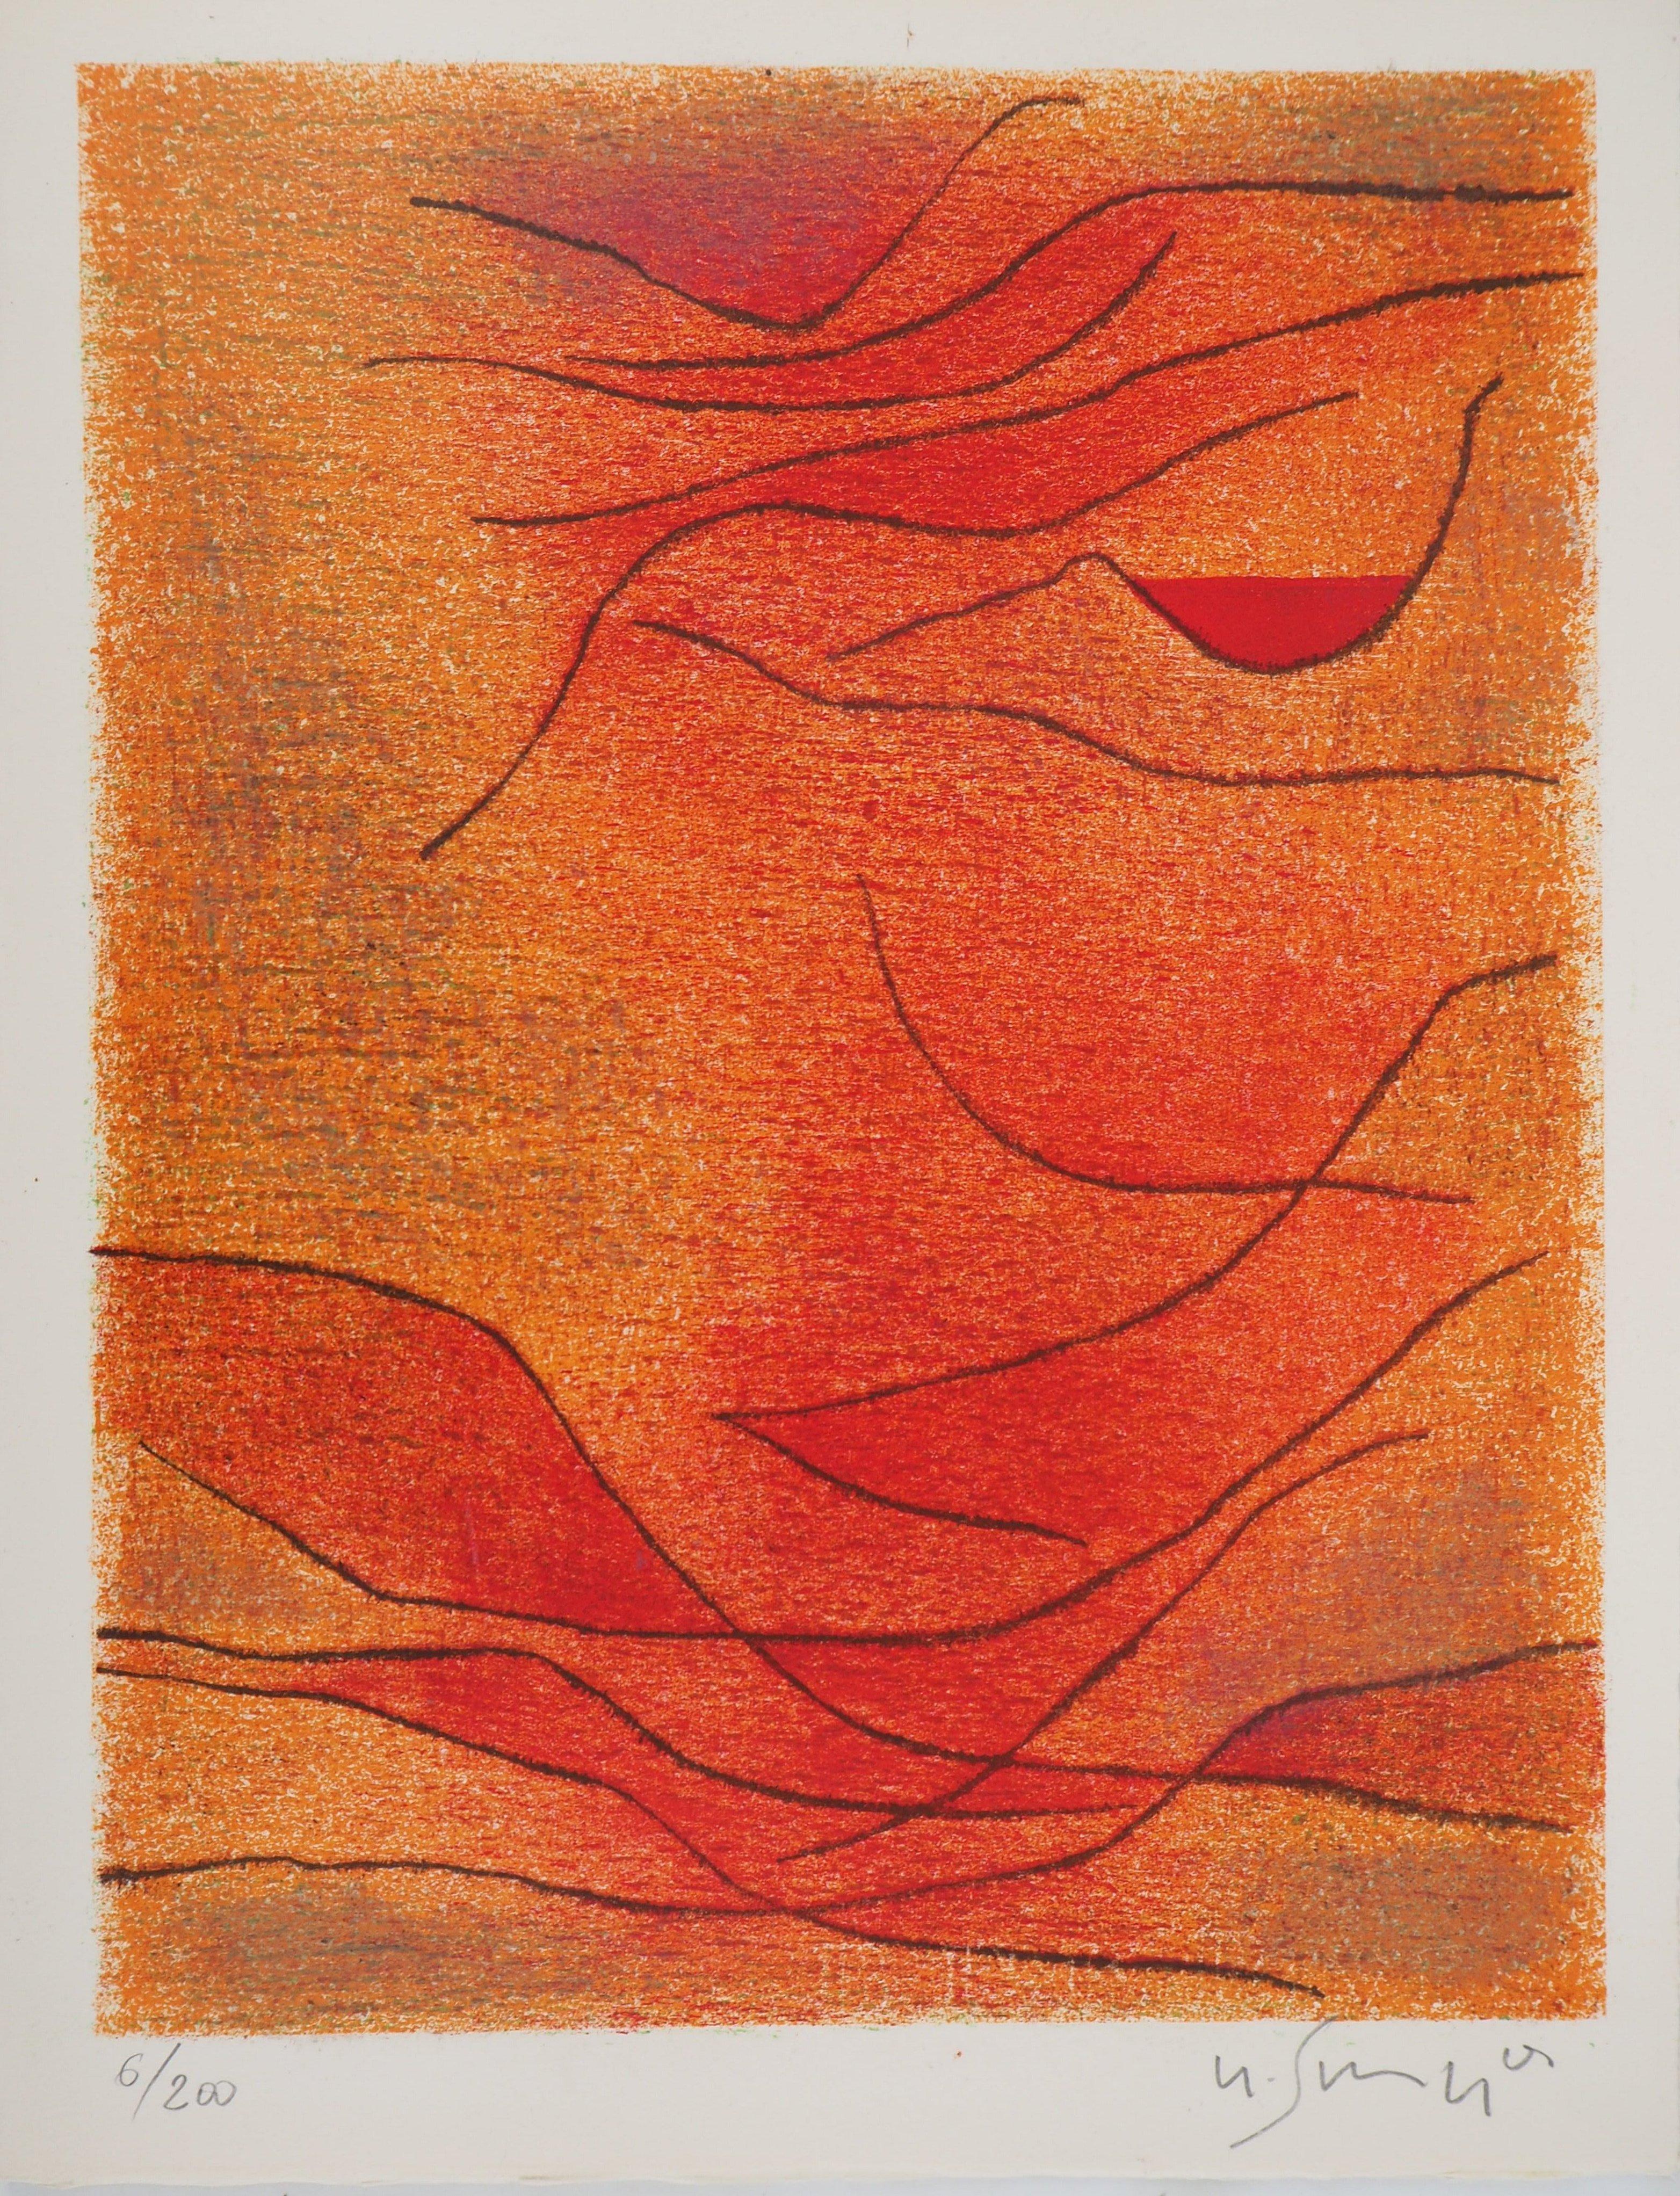 Gustave Singier Abstract Print - Abstract composition in Orange - Original lithograph, Handsigned